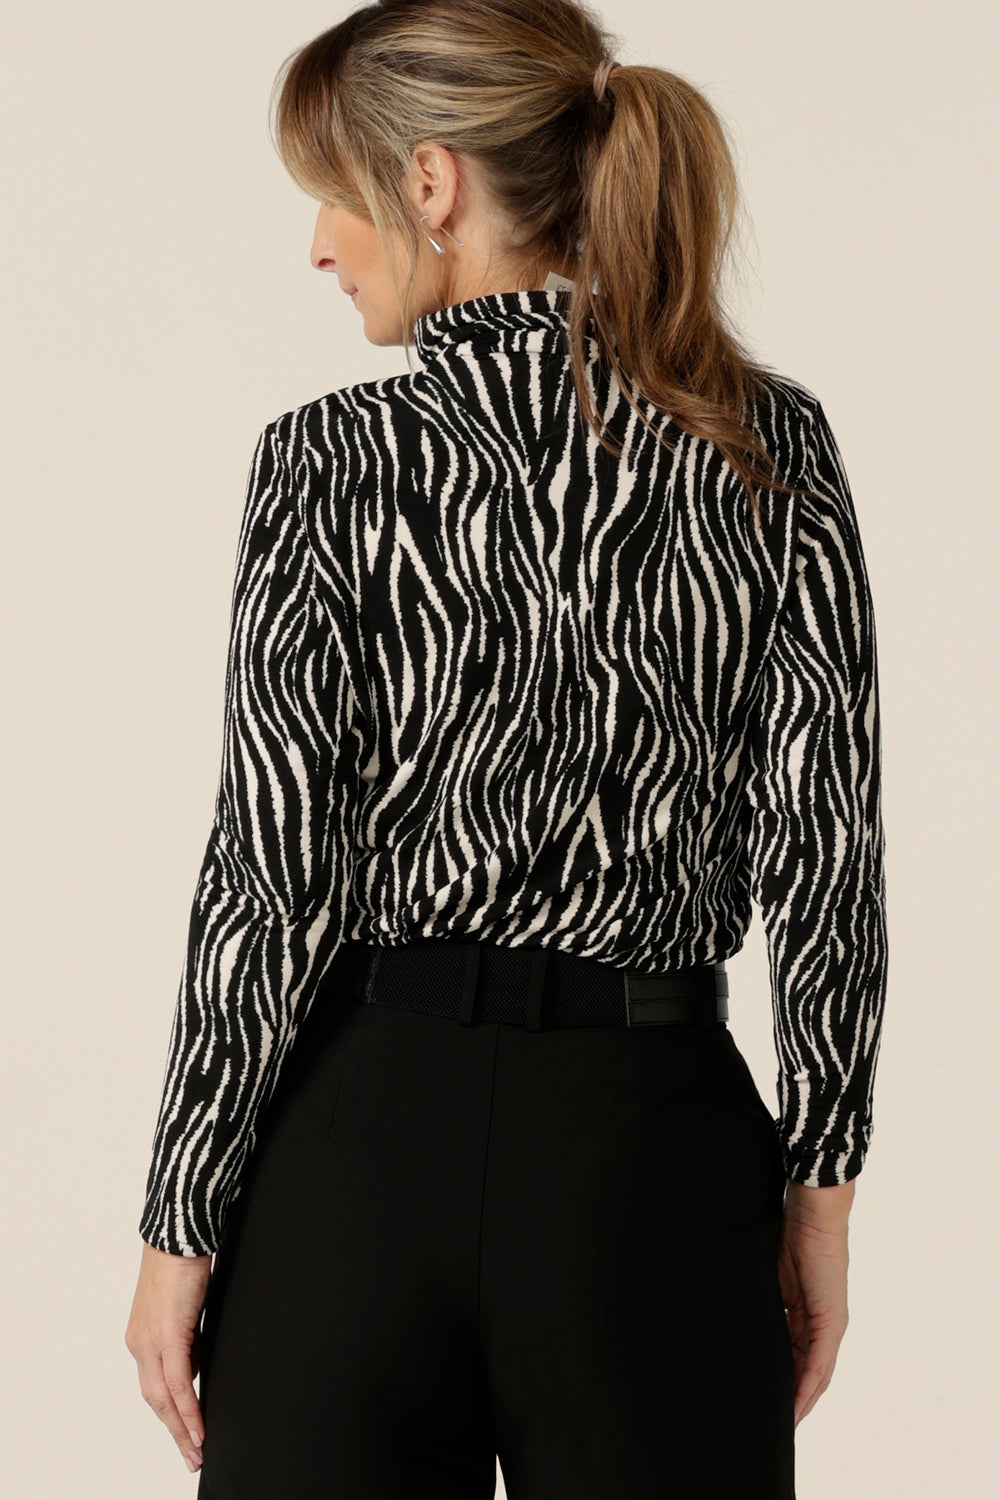 Back view of a long sleeve, polo neck top in black and white zebra print jersey. Made in Australia by Australian and New Zealand women's clothing brand, L&F, shop this work top in sizes 8 to 24.